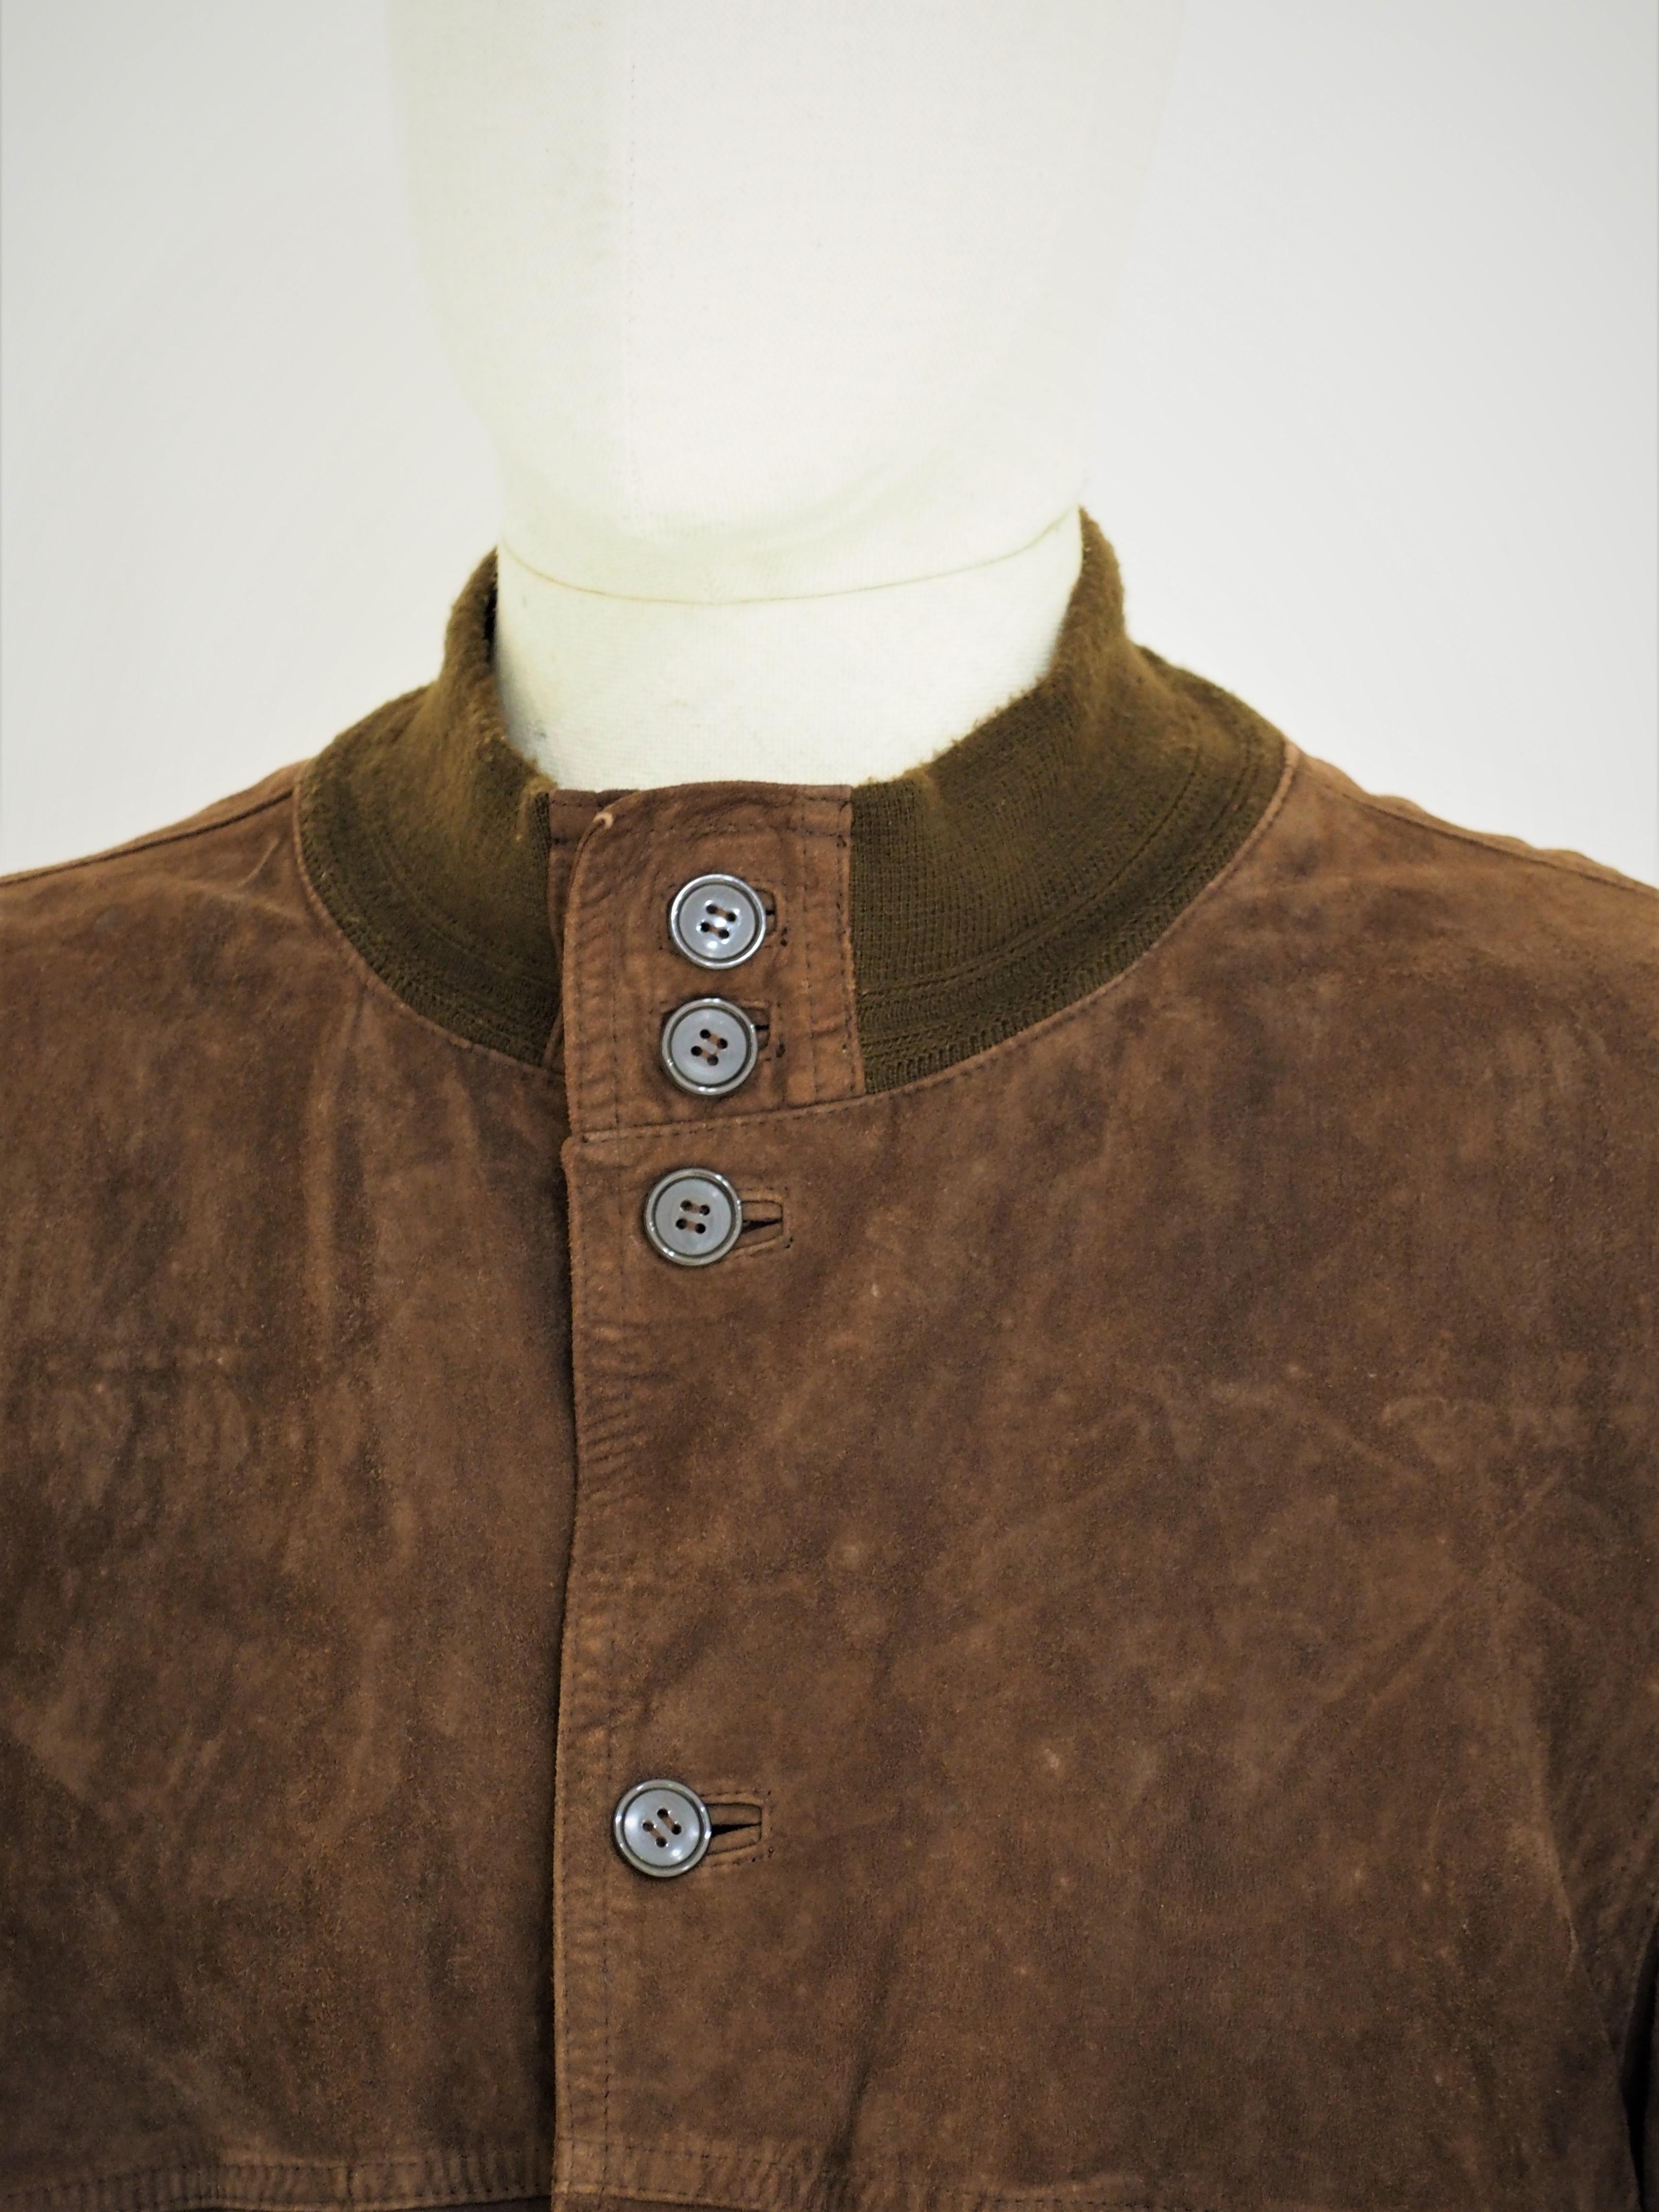 Brown suede bomber jacket 
size L 